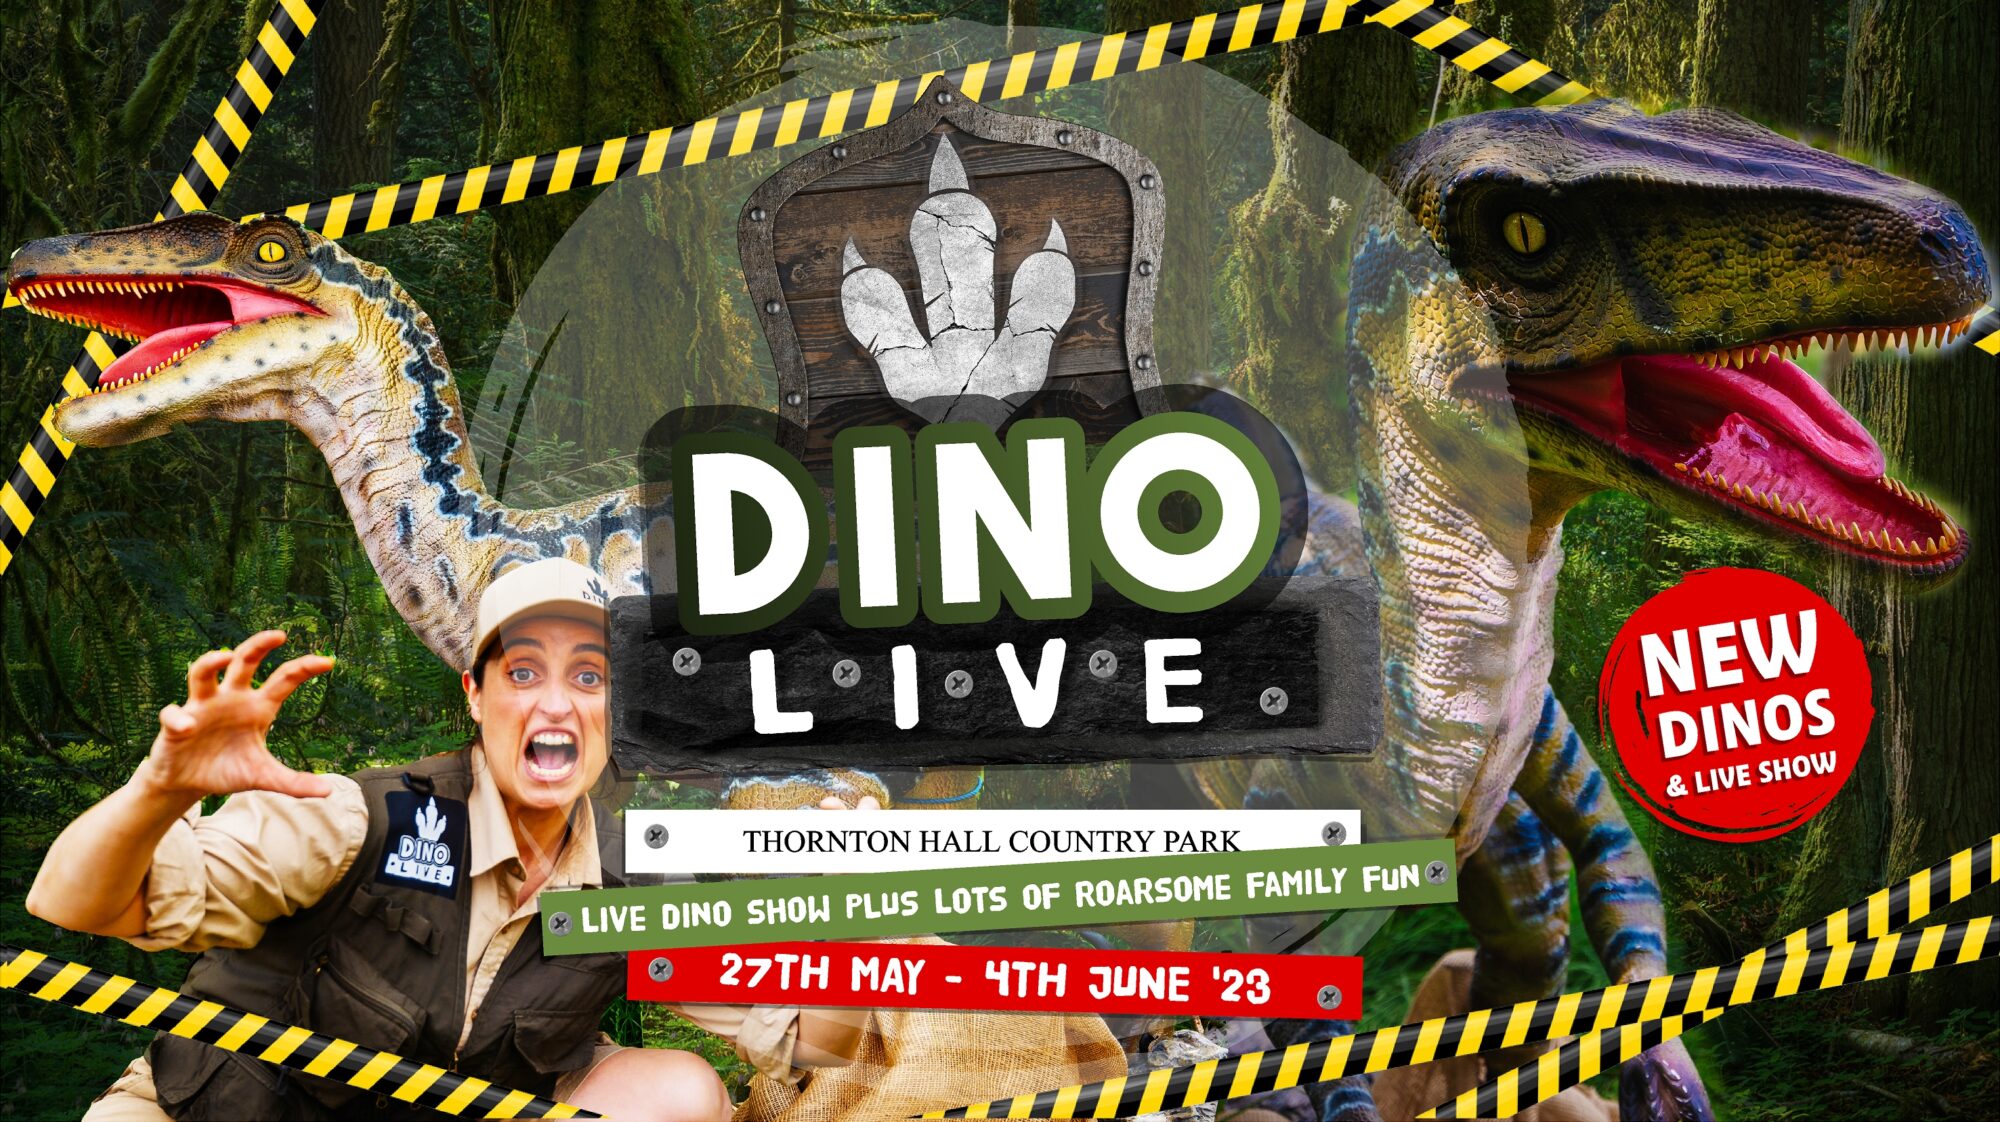 Image name Dino Live Rect Web tickets the 33 image from the post Dino Live in Yorkshire.com.